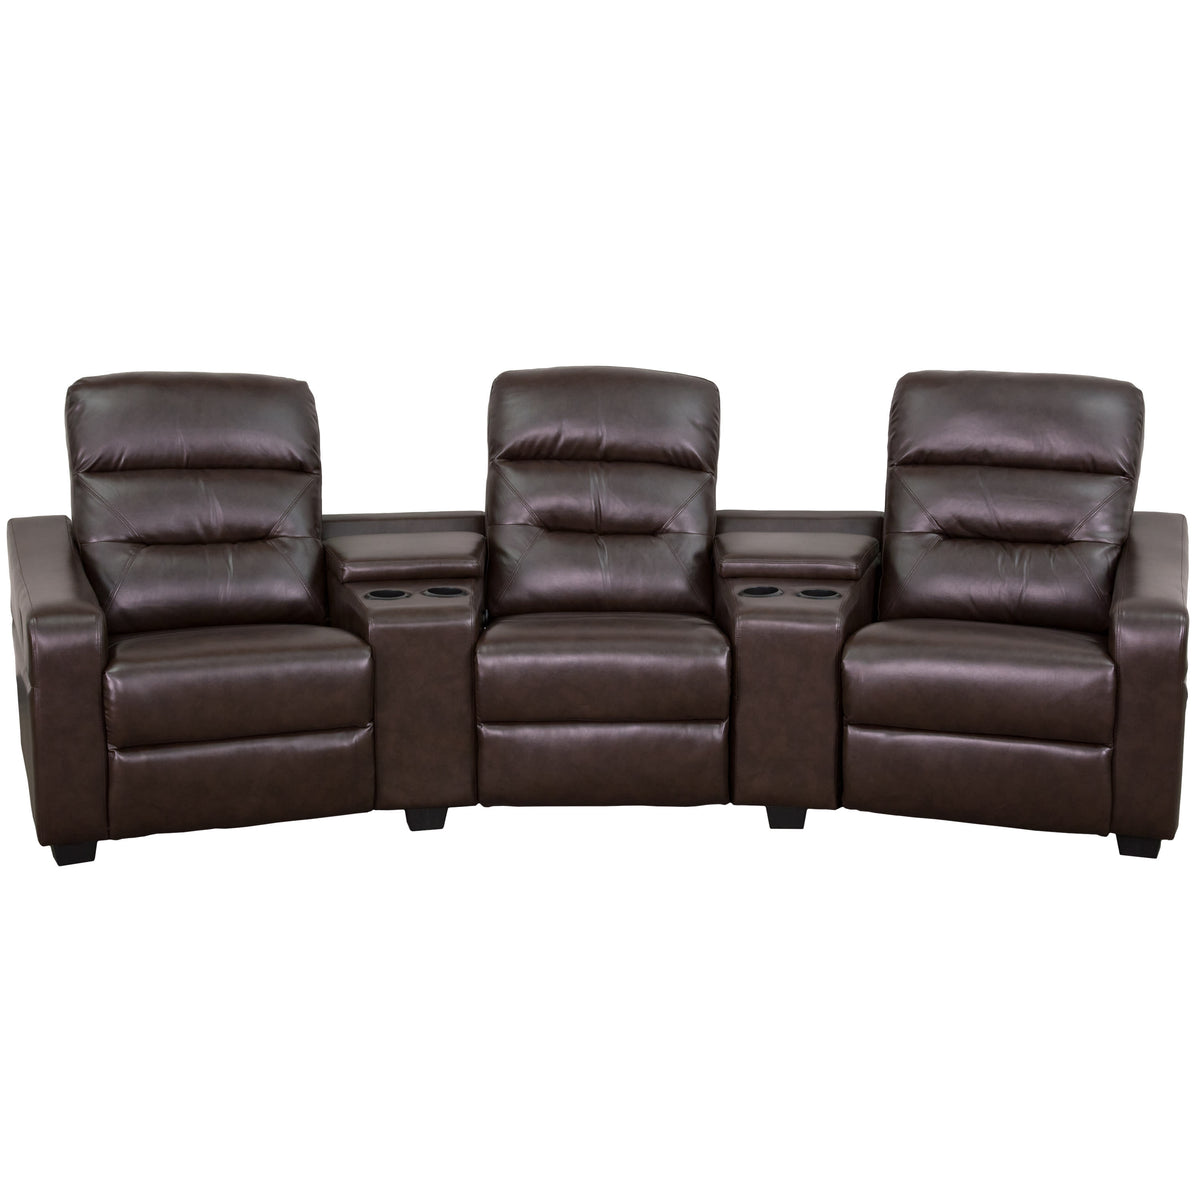 Brown |#| 3-Seat Reclining Brown LeatherSoft Tufted Bustle Back Seating Unit w/Cup Holders